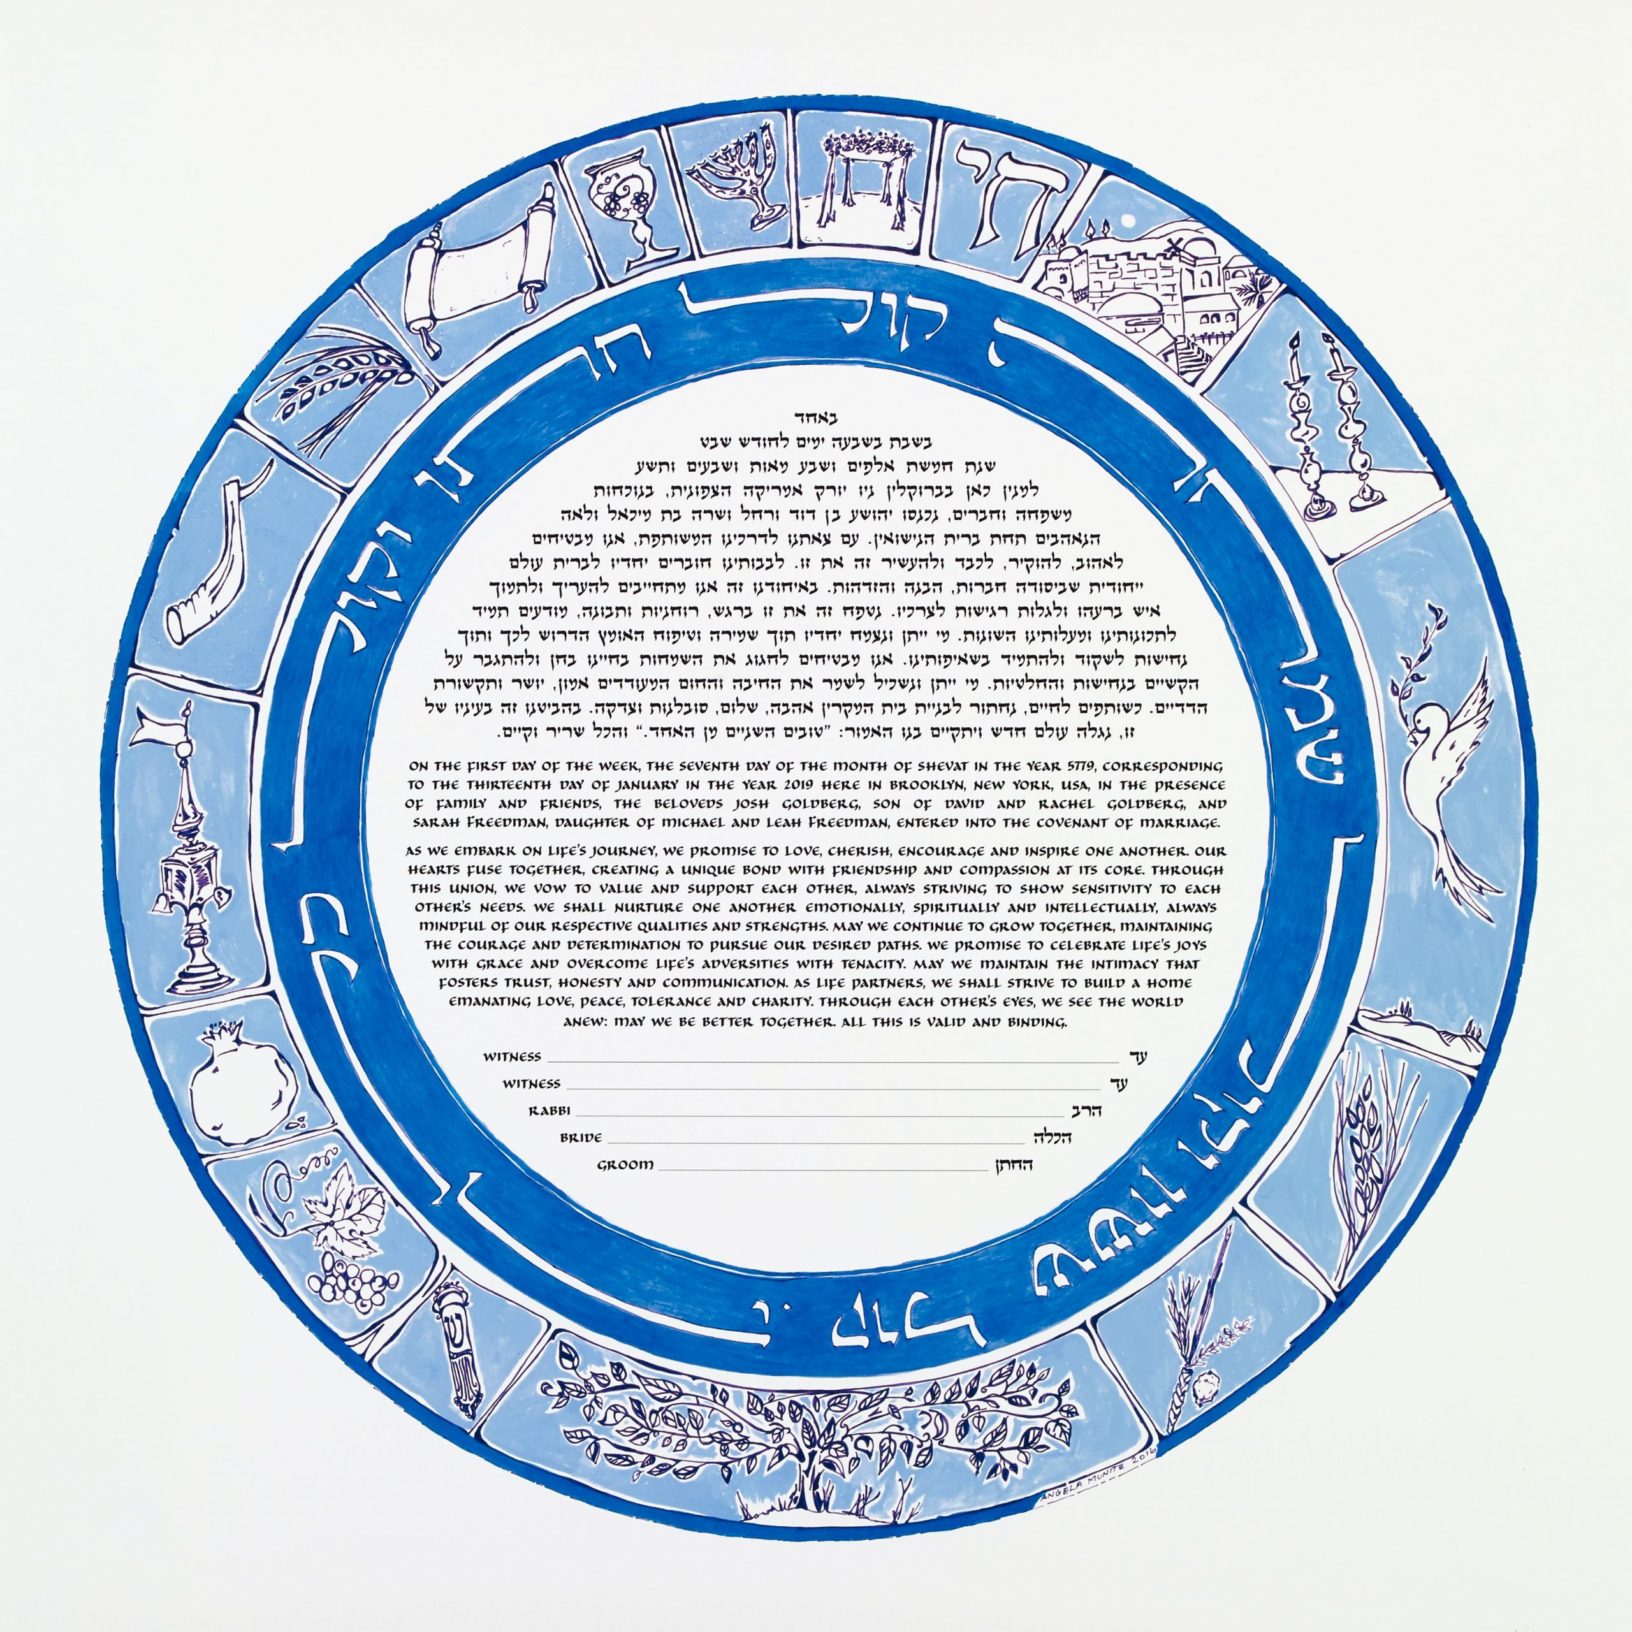 Ring of Peace Ketubah Jewish Marriage Contracts by Angela Munitz